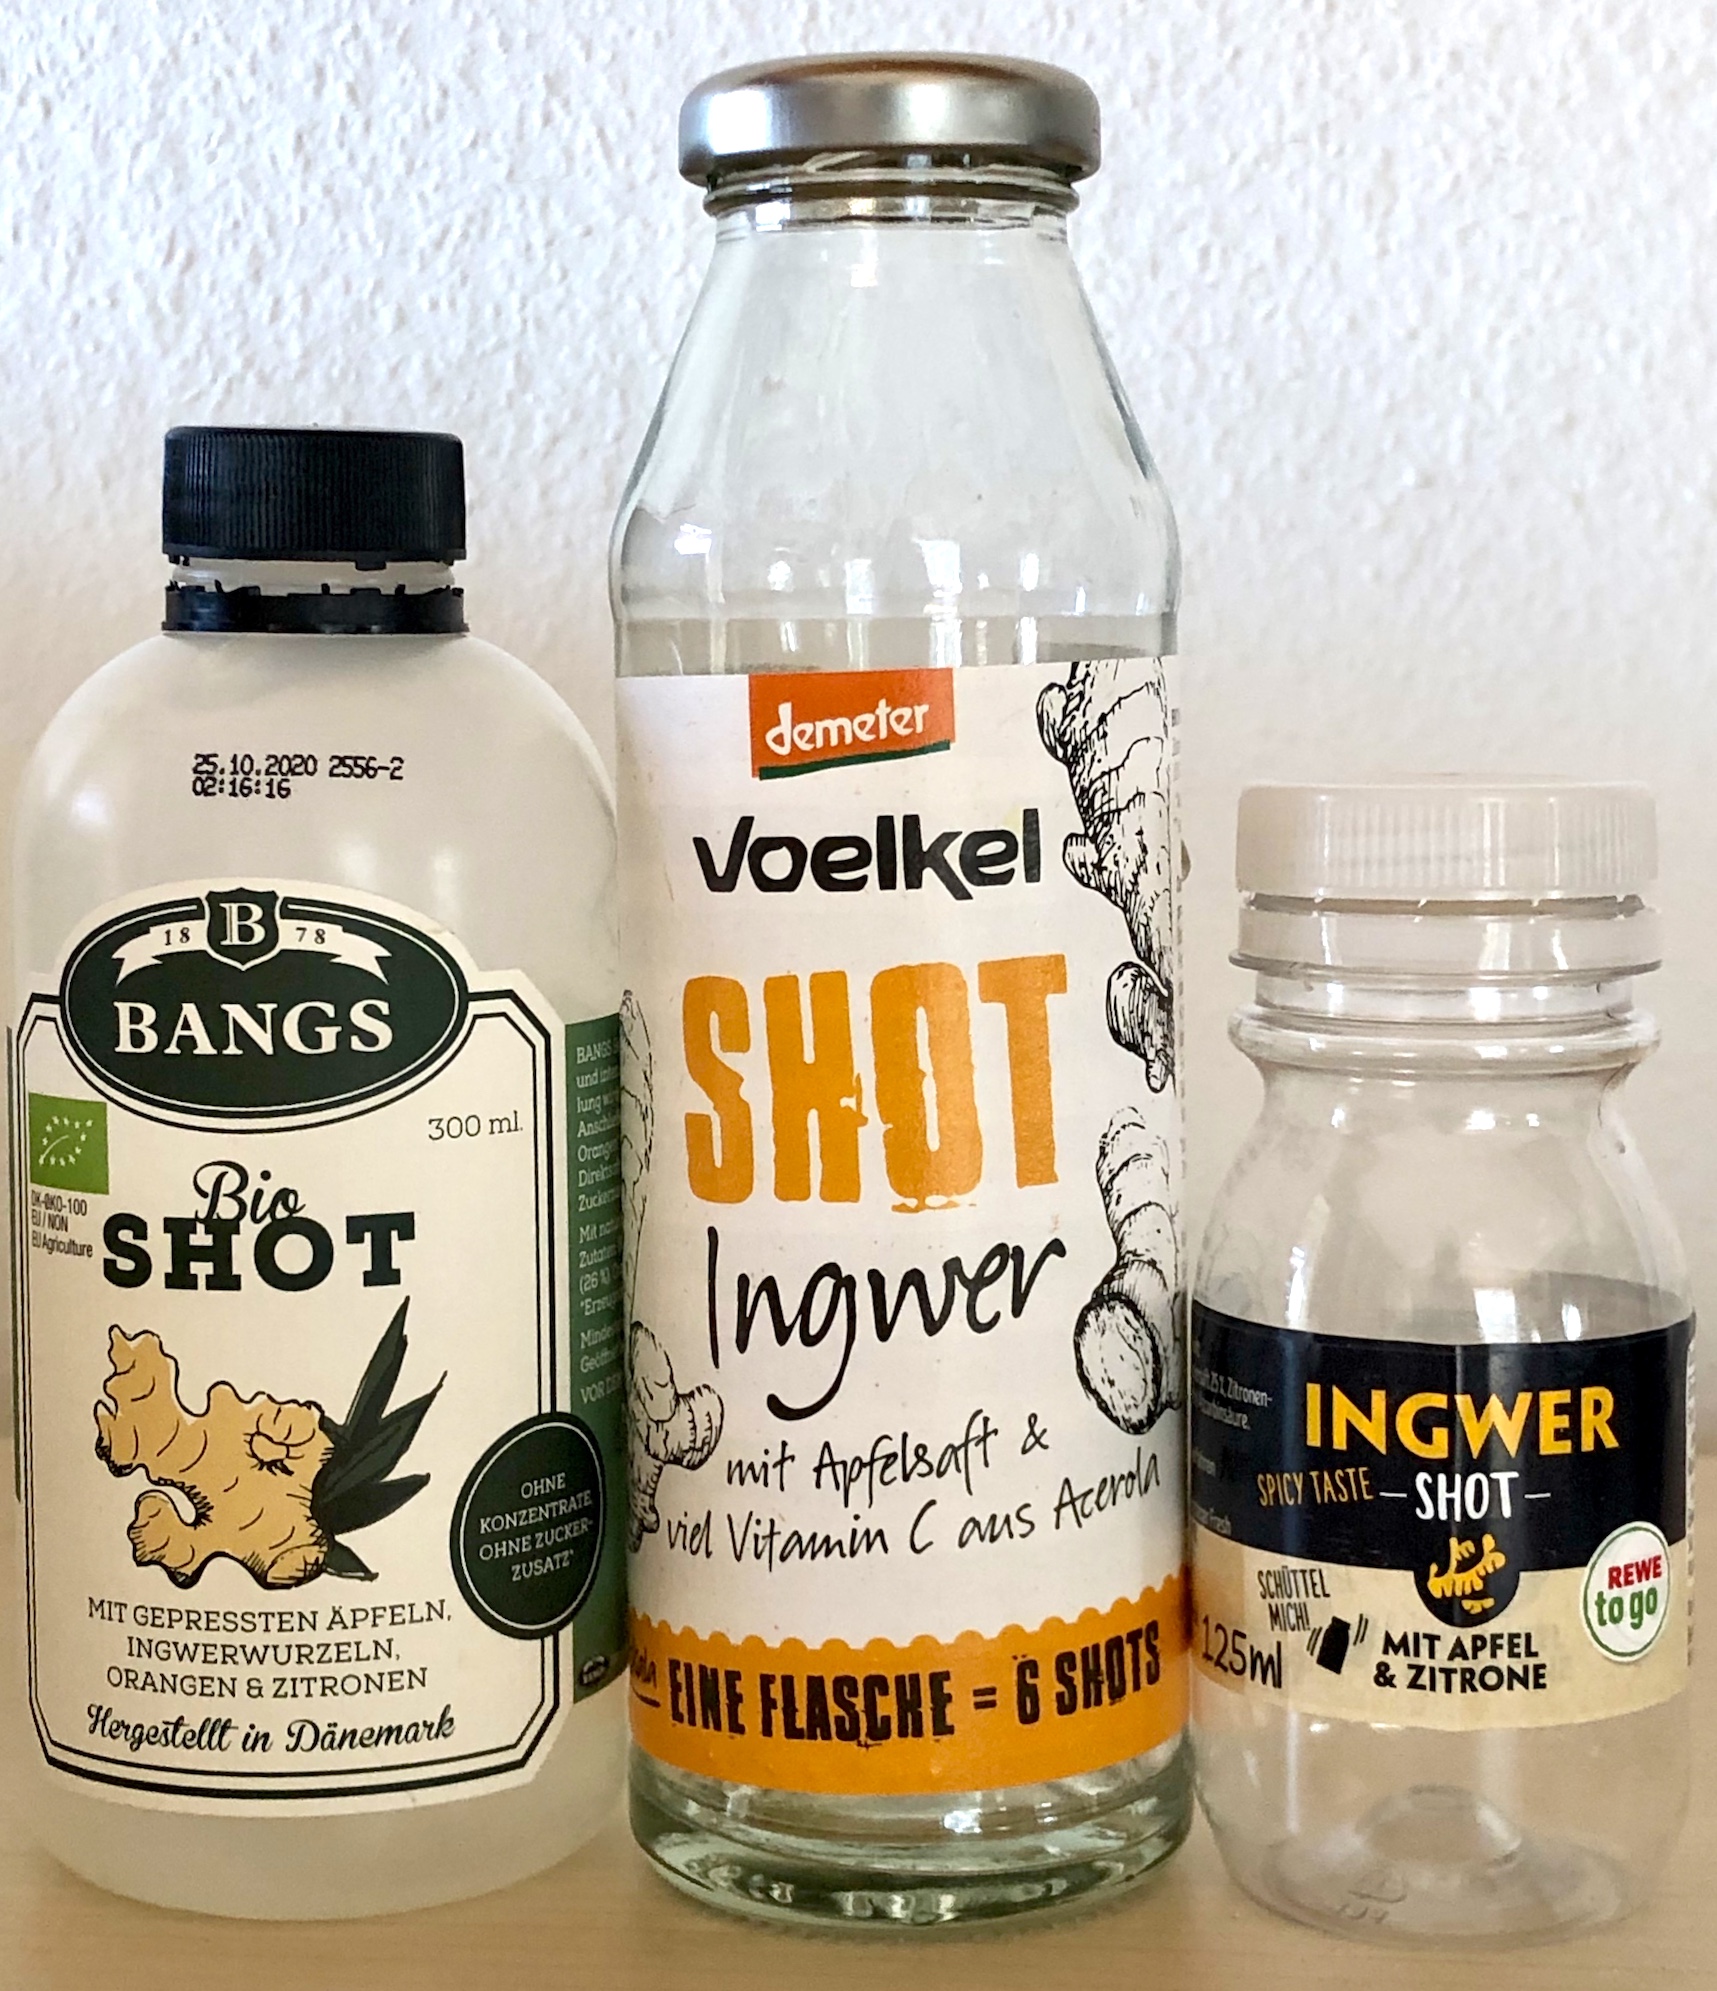 Two more immune boosting drinks